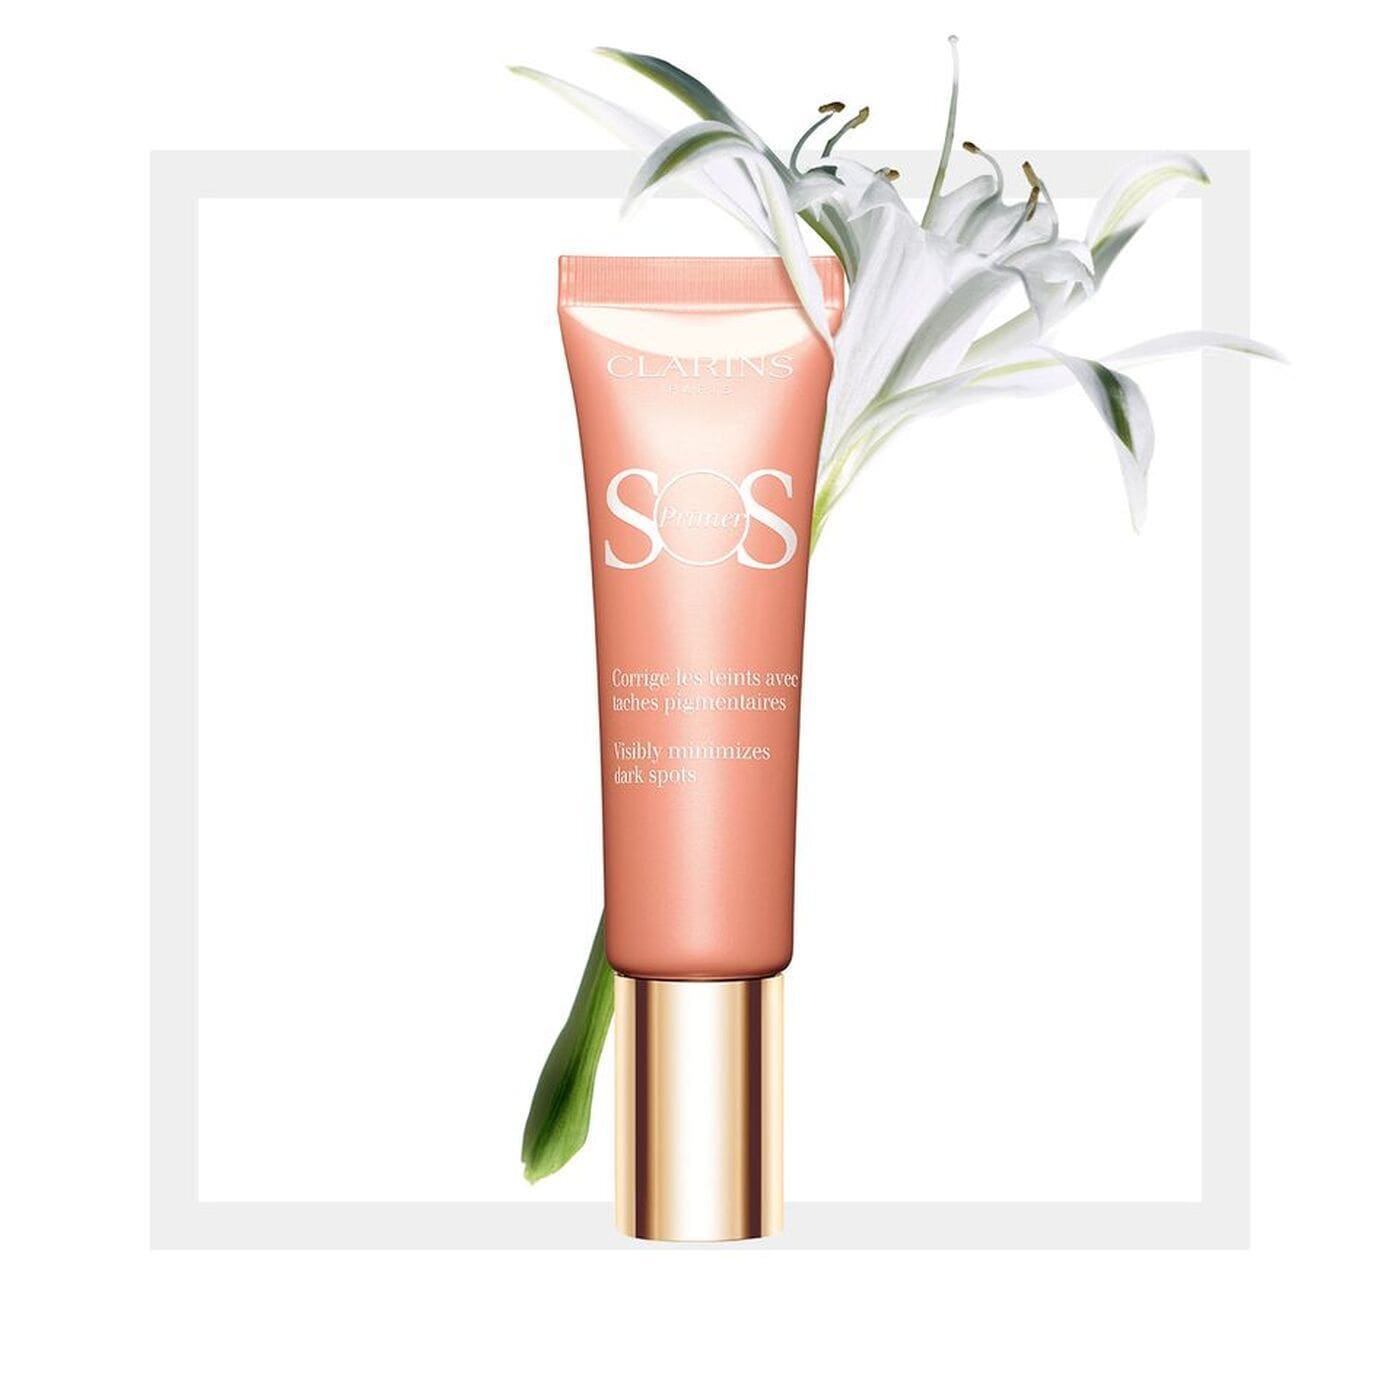 Clarins Beauty Clarins Colour Control Primer 03 Coral 3380810185362 218635